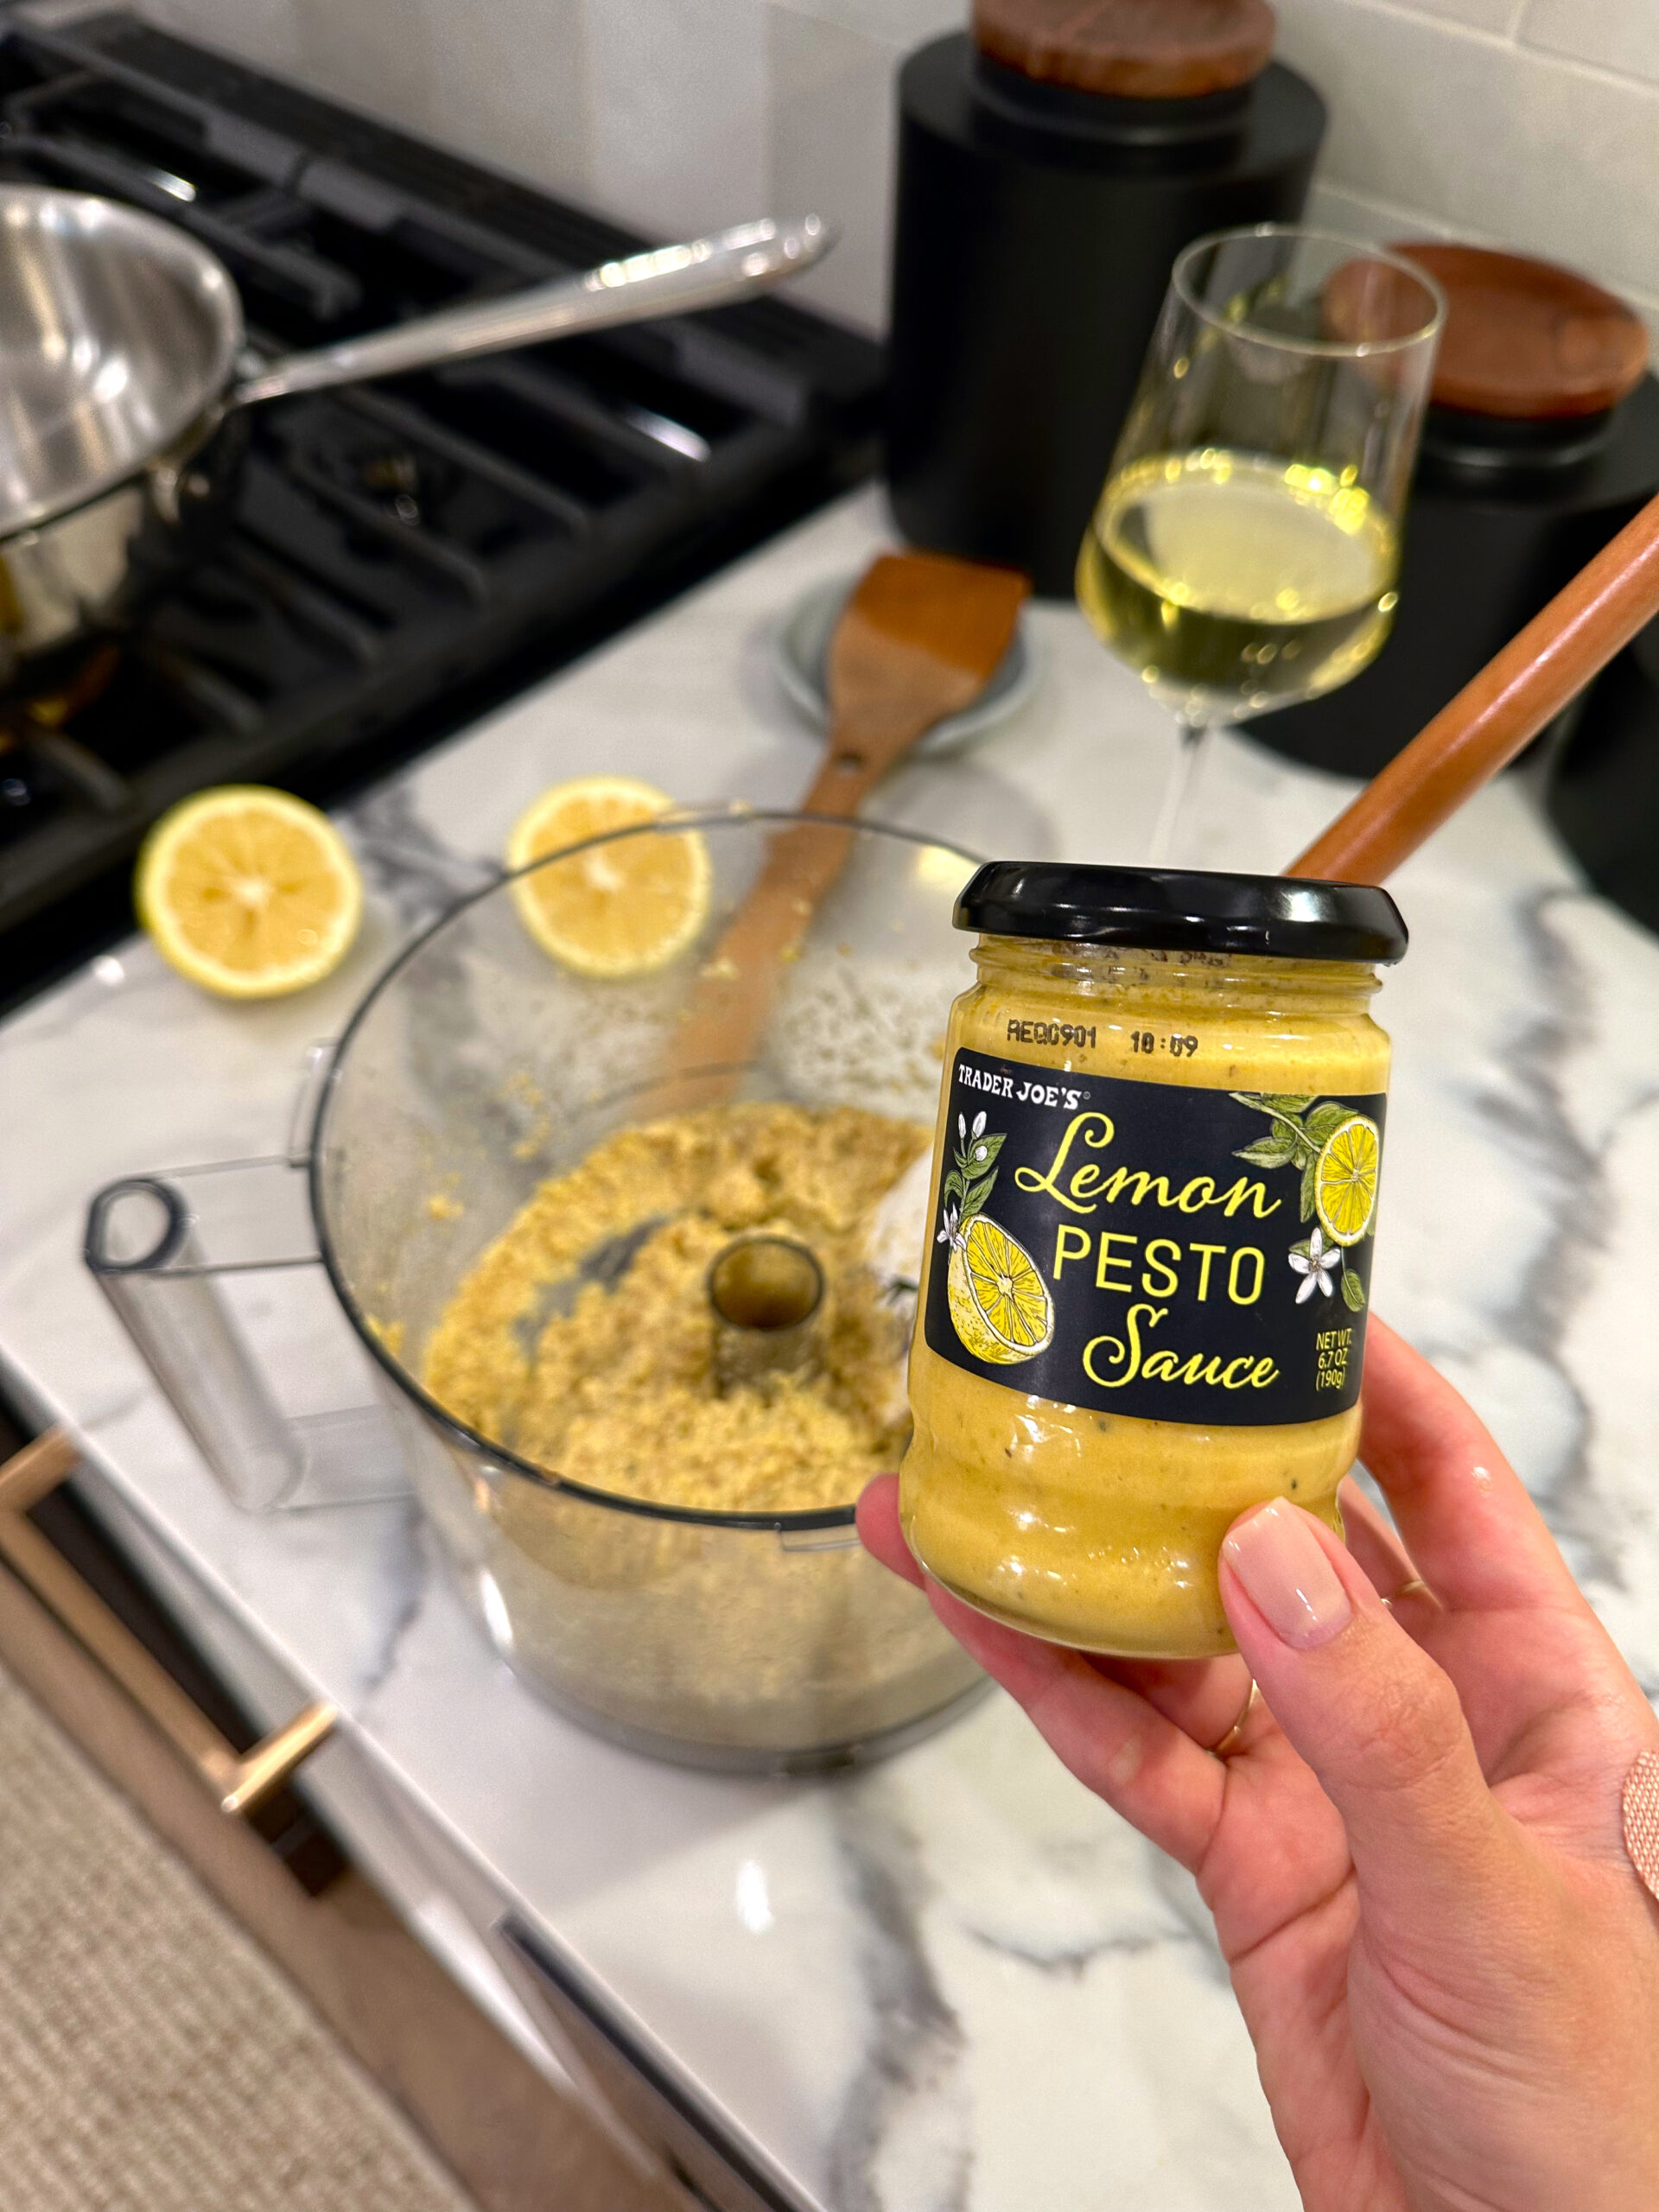 This is a quick and easy dinner recipe for Trader Joe’s Lemon Pesto Sauce But Better